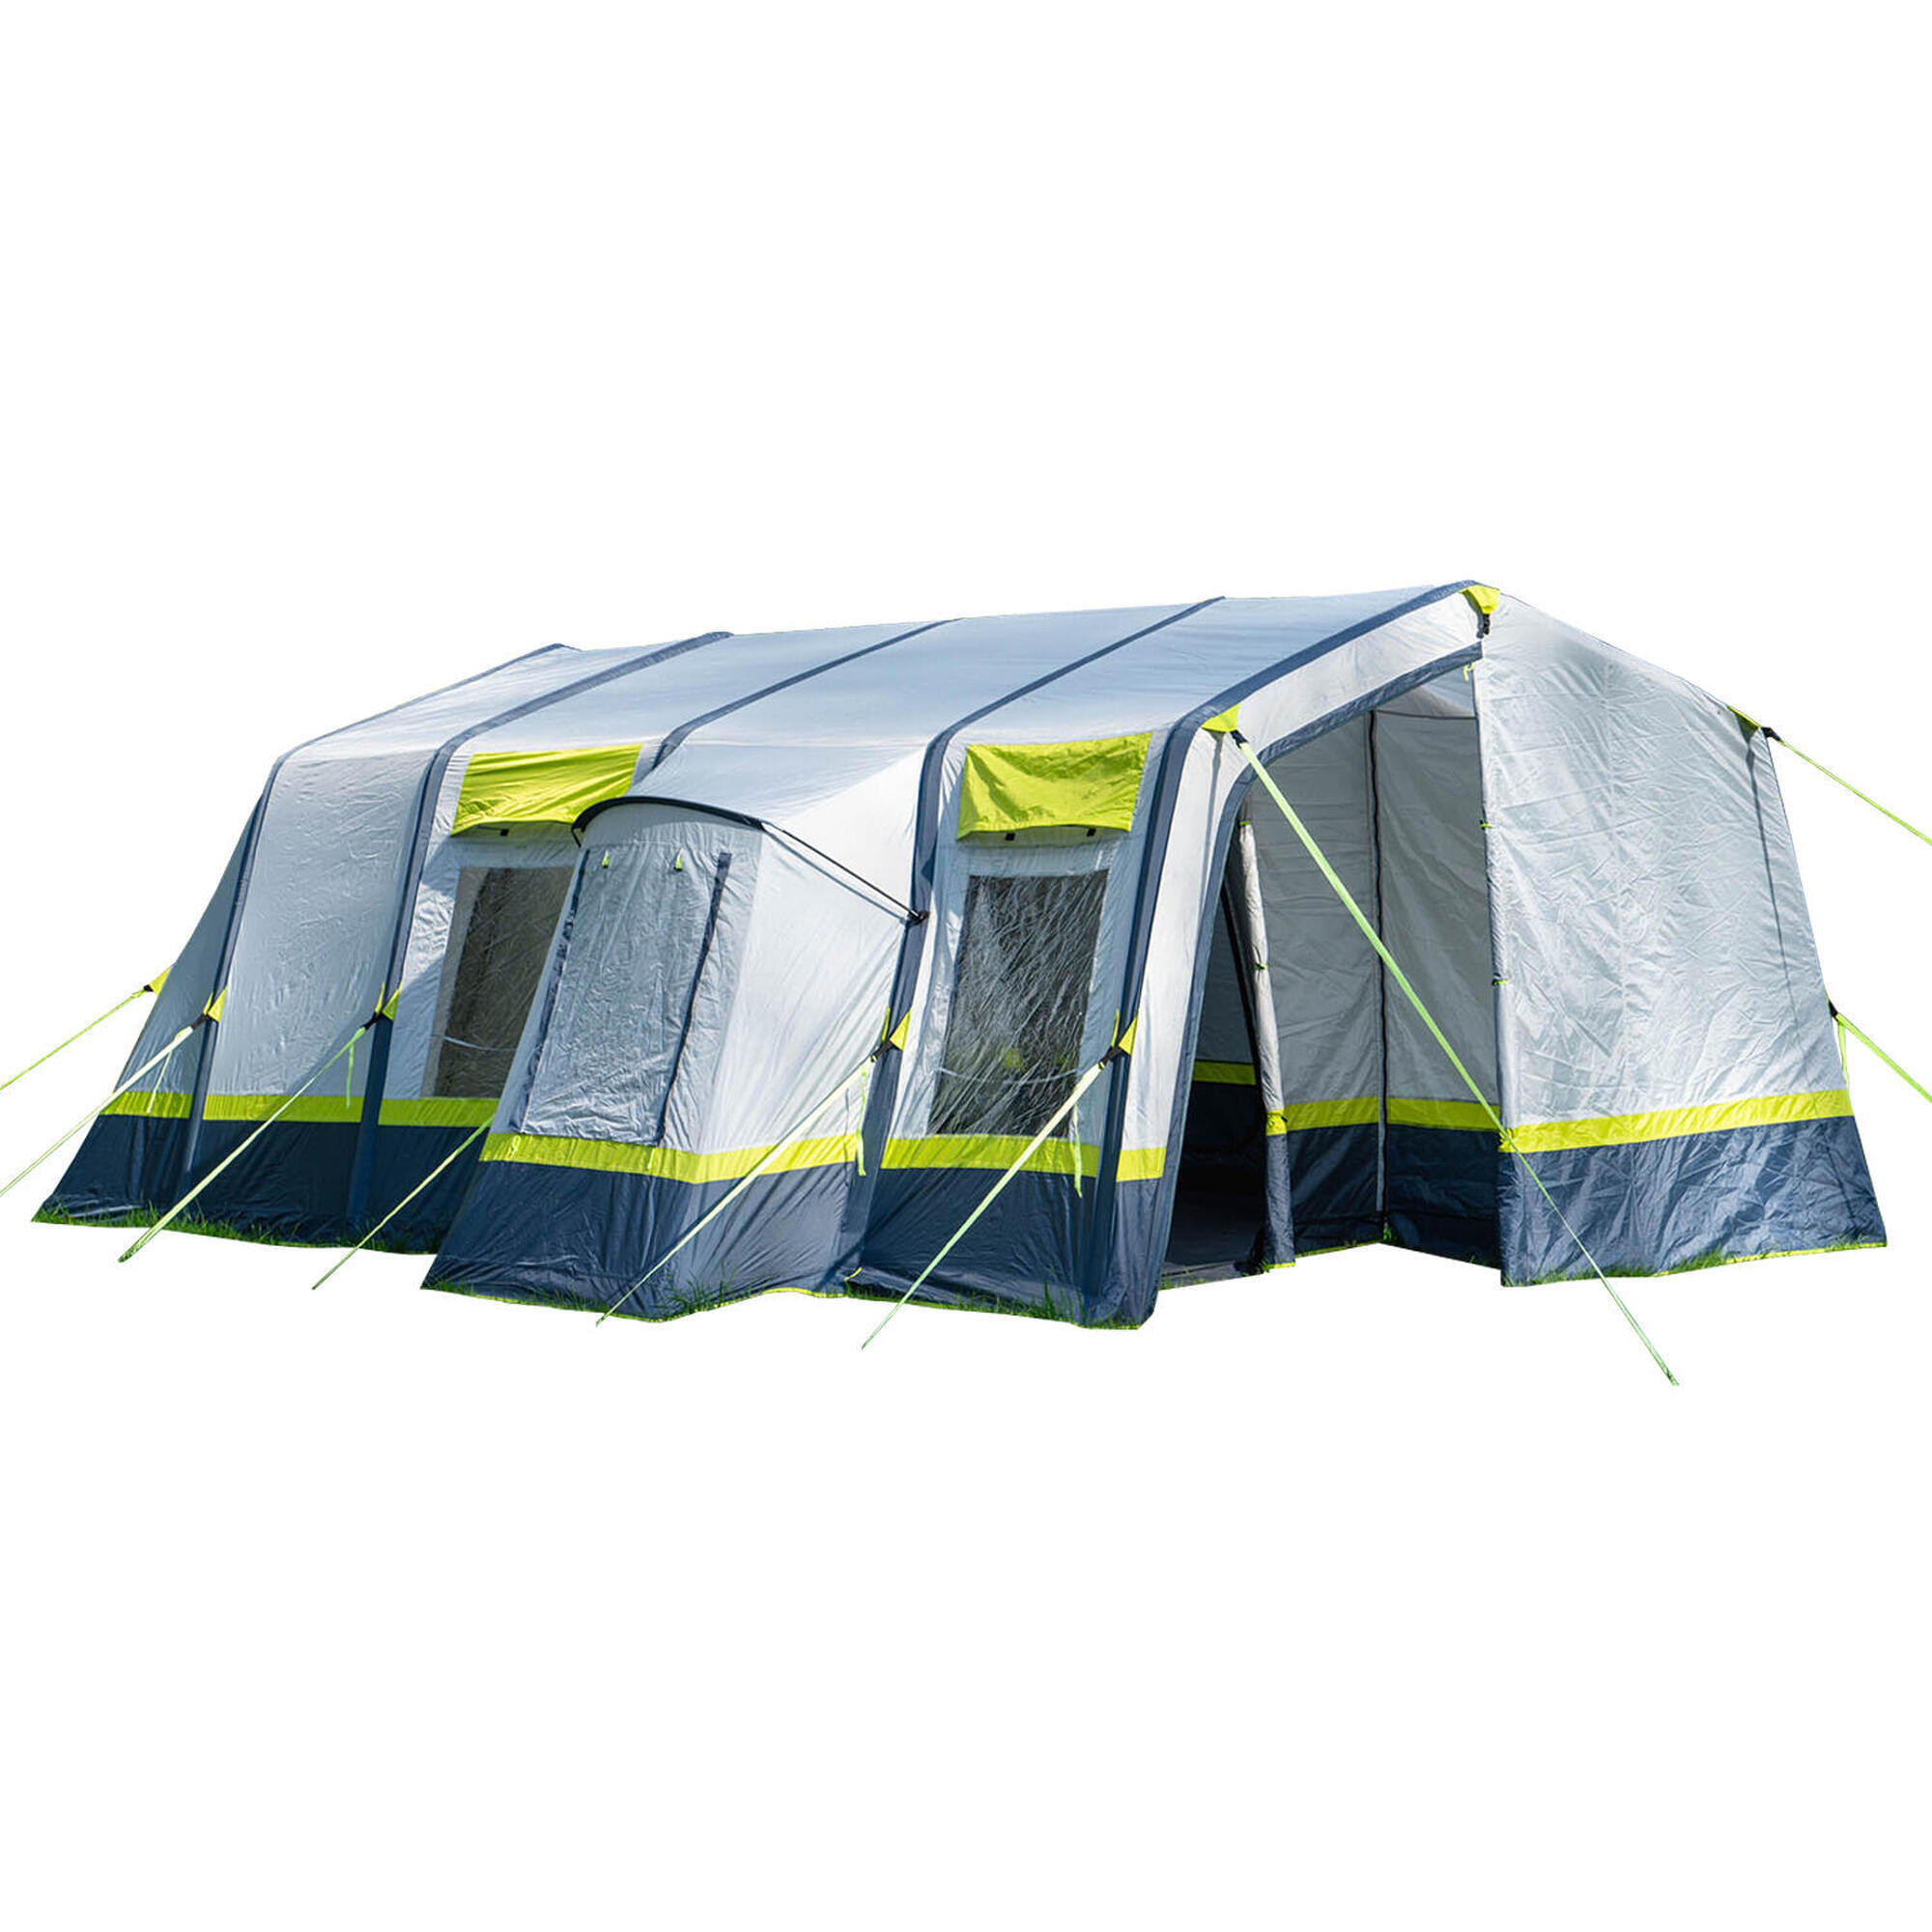 OLPRO Home 5 Berth Inflatable Family Tent 1/7